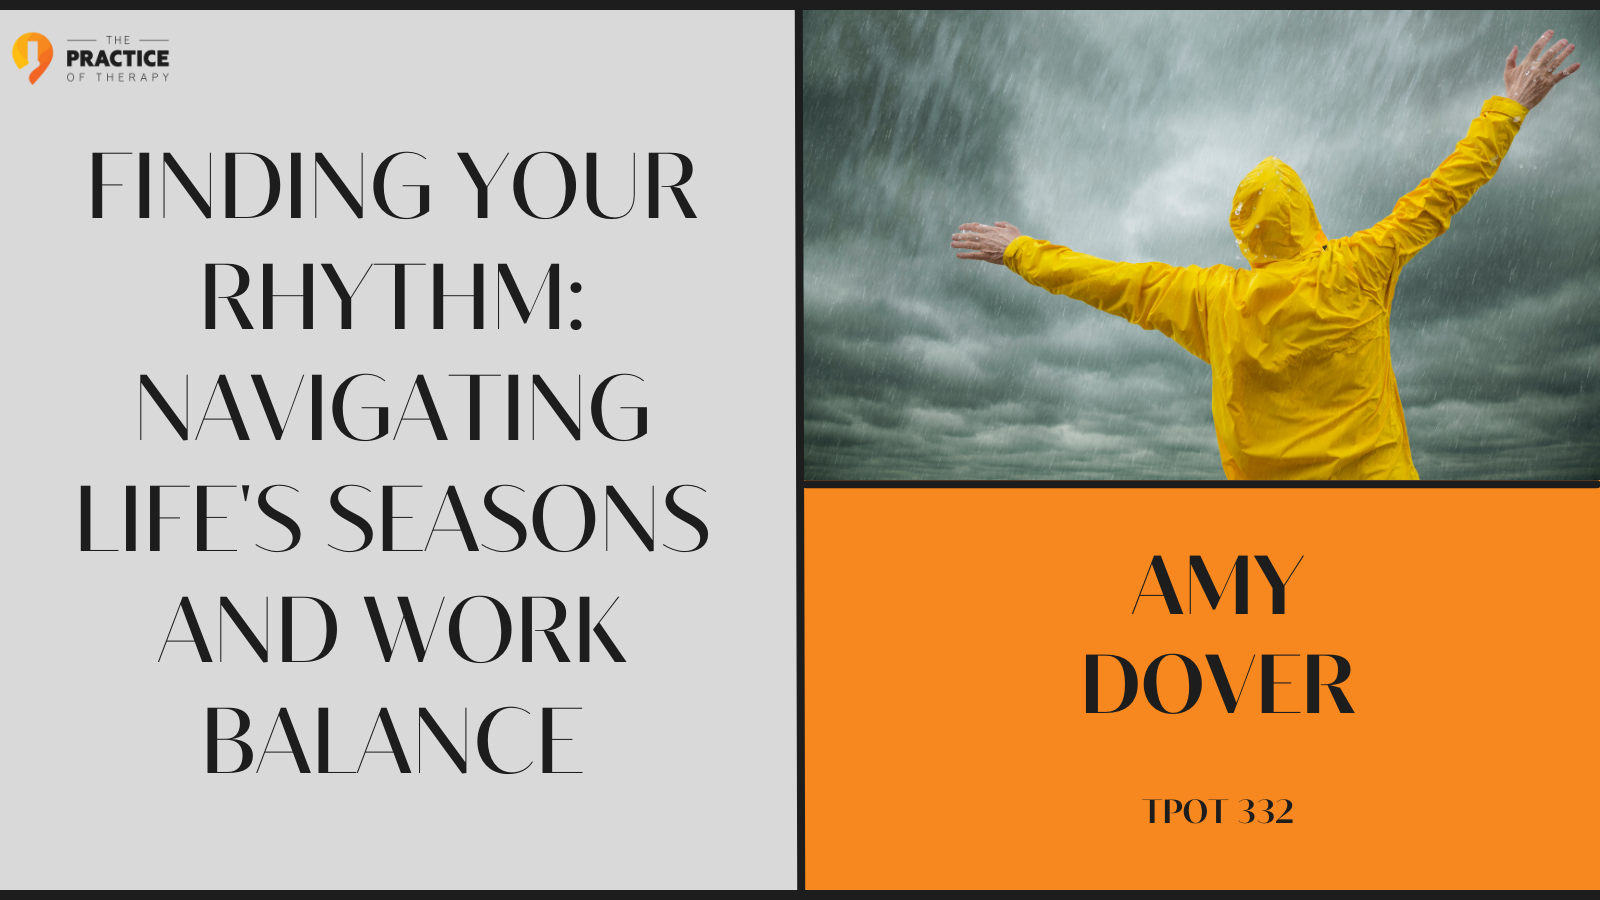 Amy Dover Finding Your Rhythm Navigating Life's Seasons and Work Balance TPOT 332